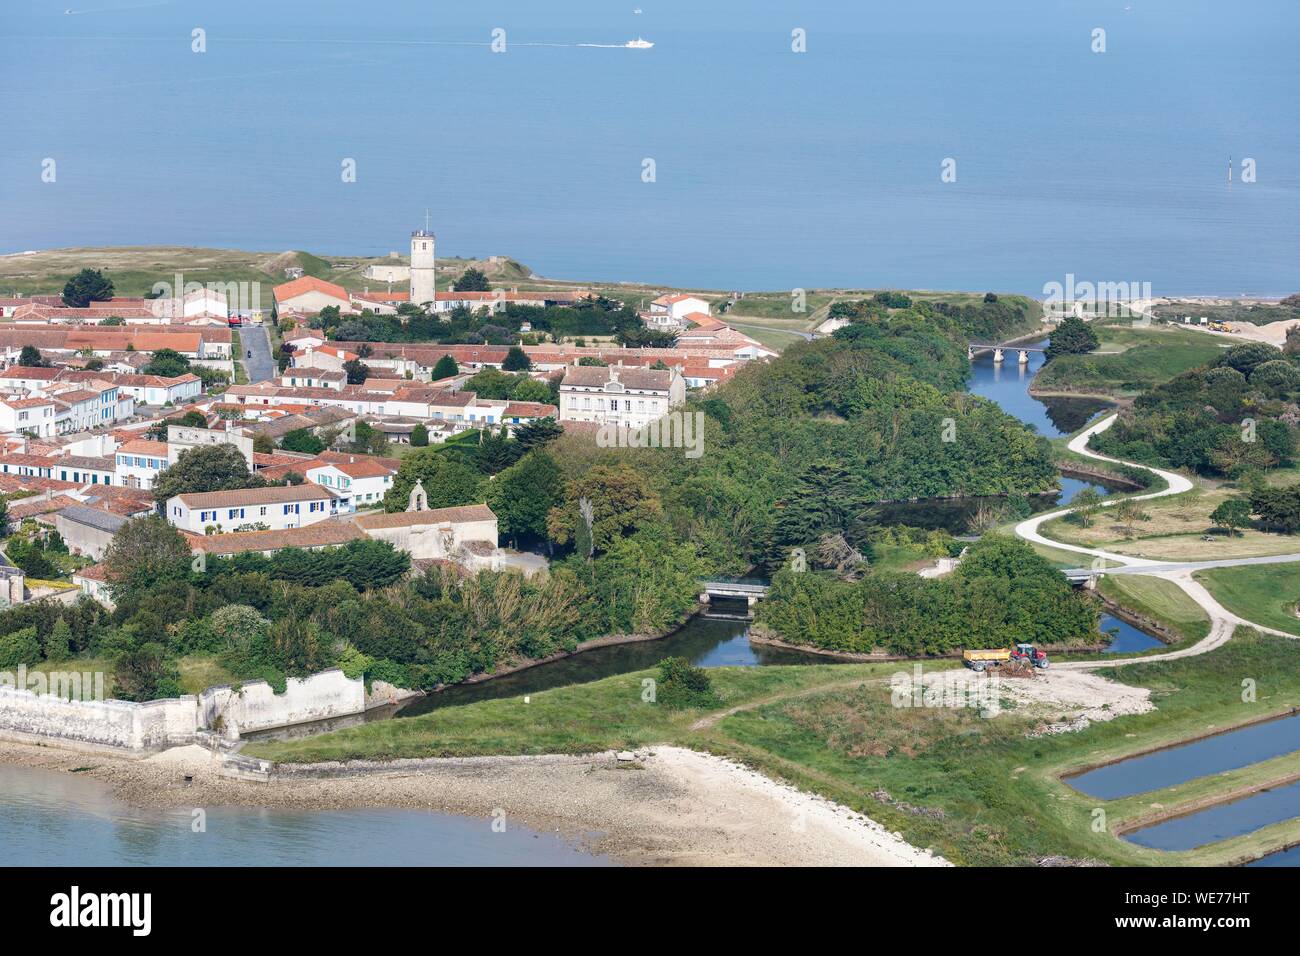 France, Charente Maritime, Aix island, the moat protecting the town (aerial view) Stock Photo